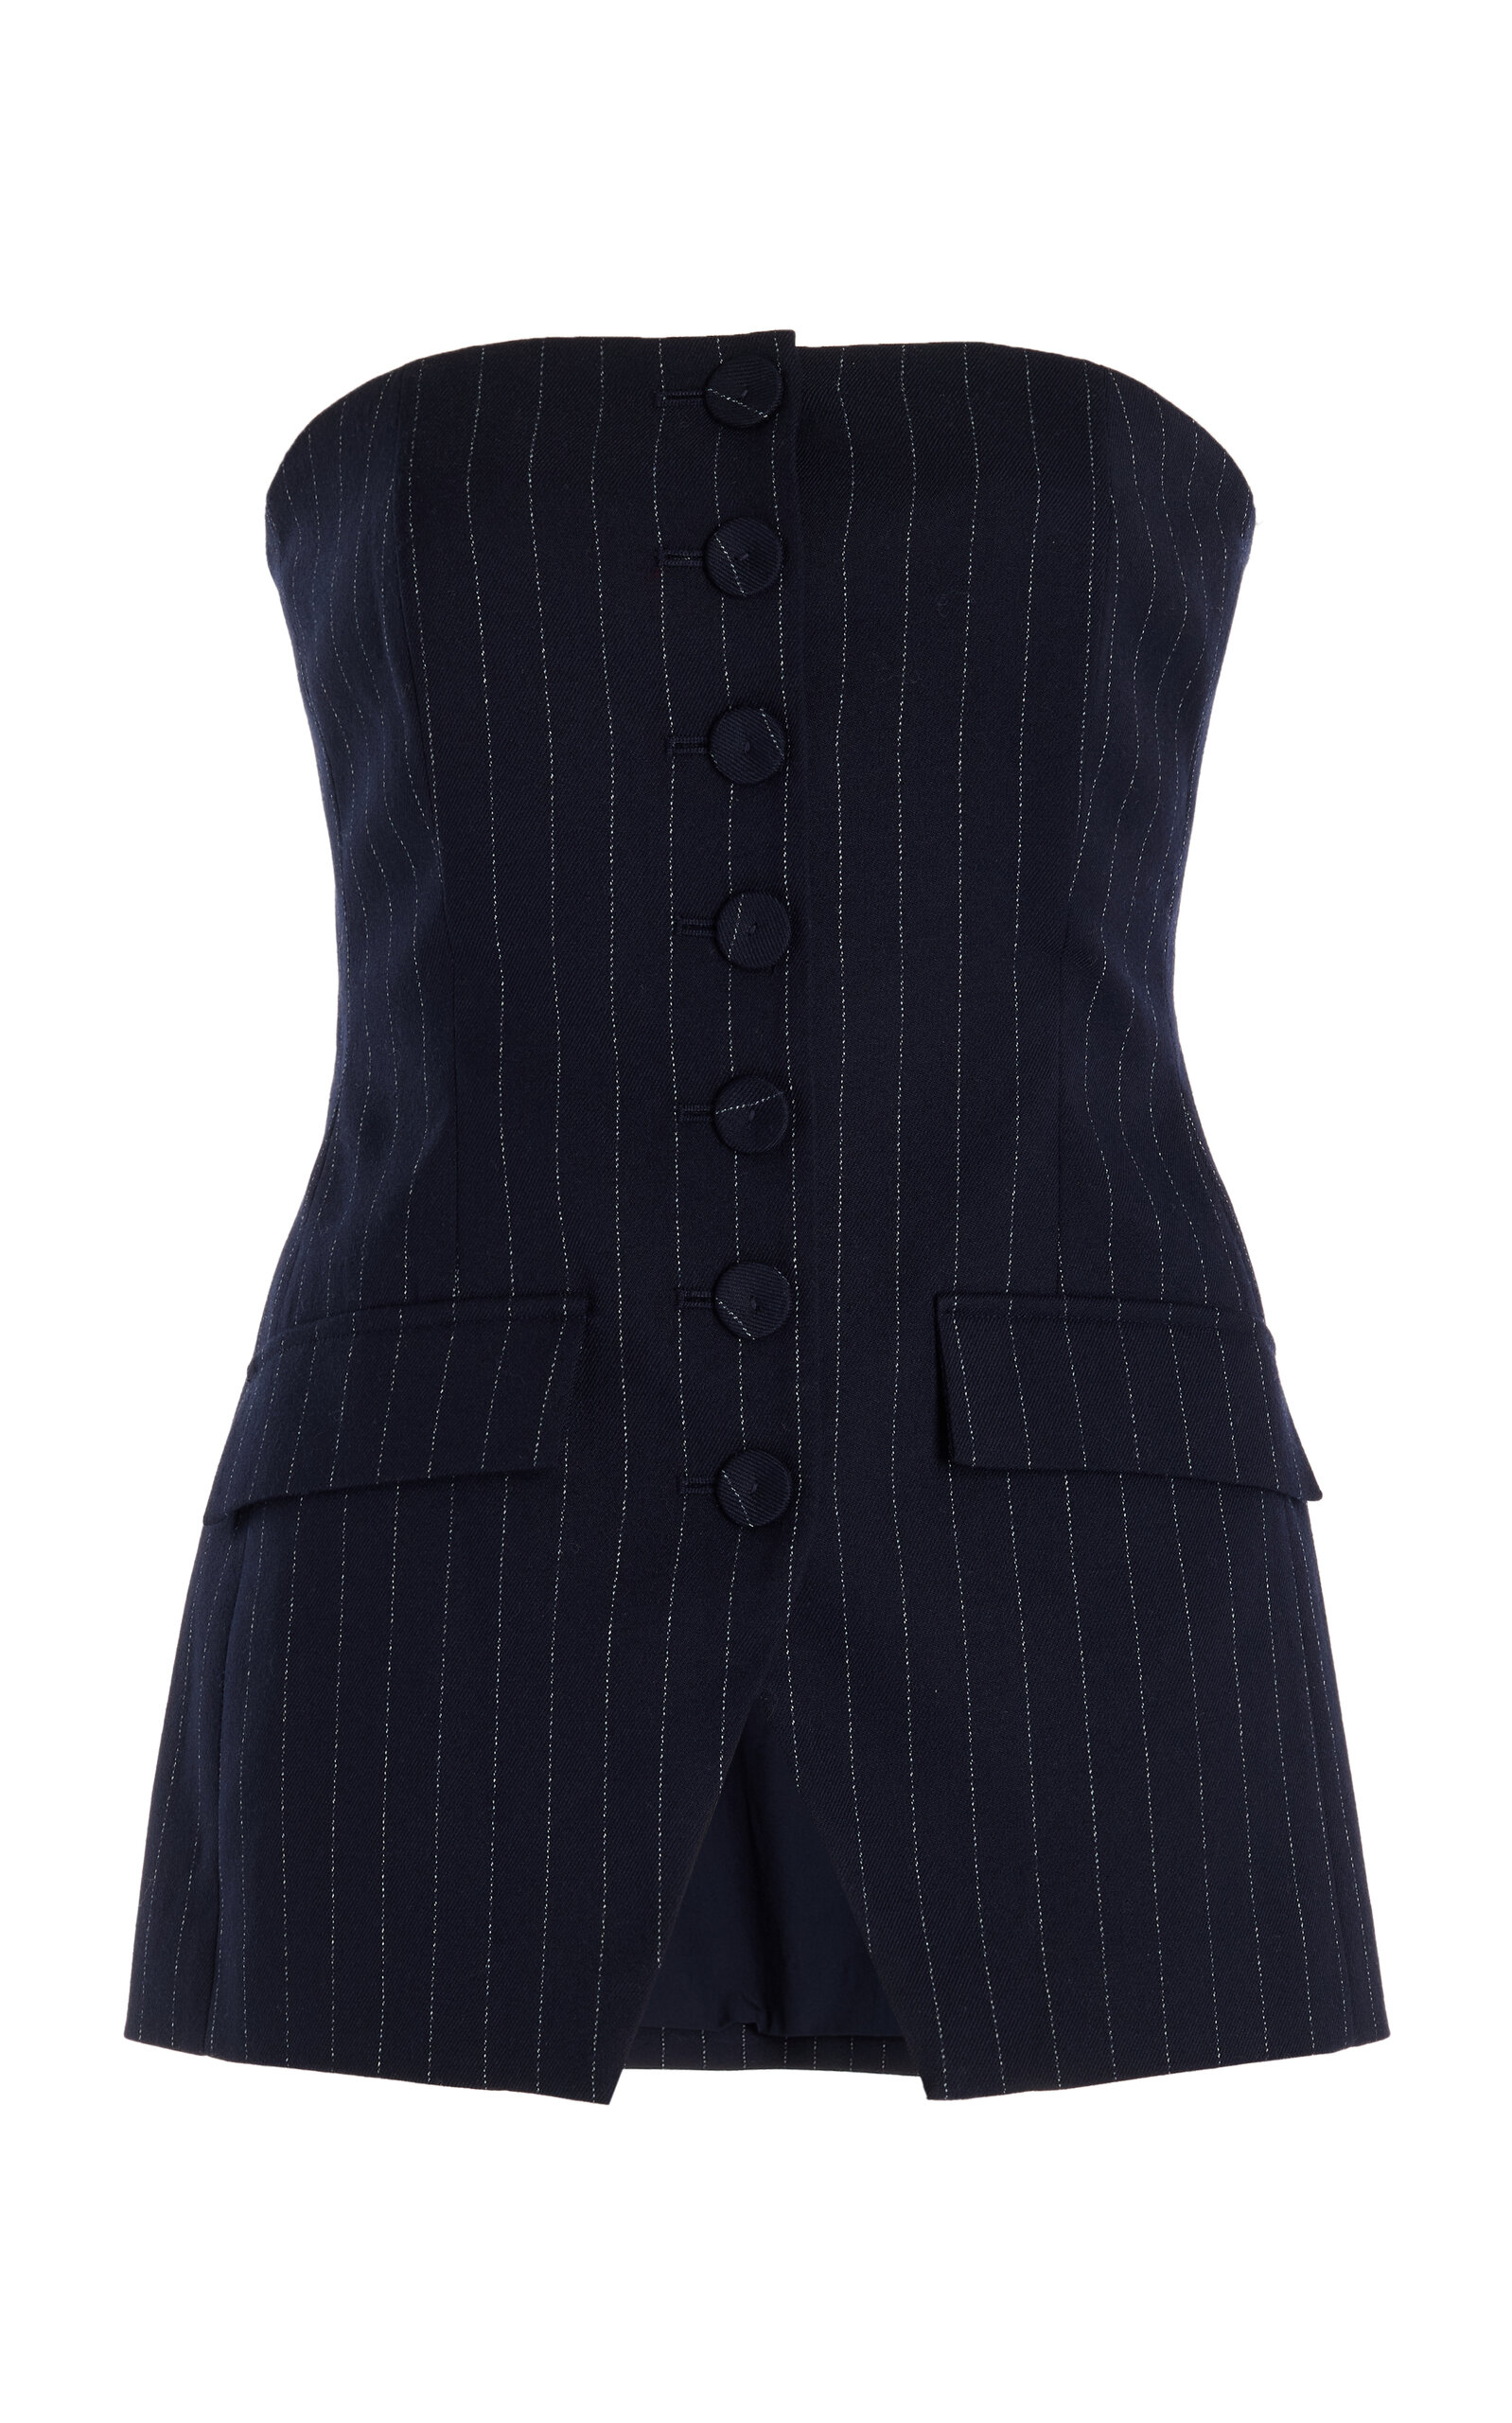 The Phoebe Pinstroped Bustier Top